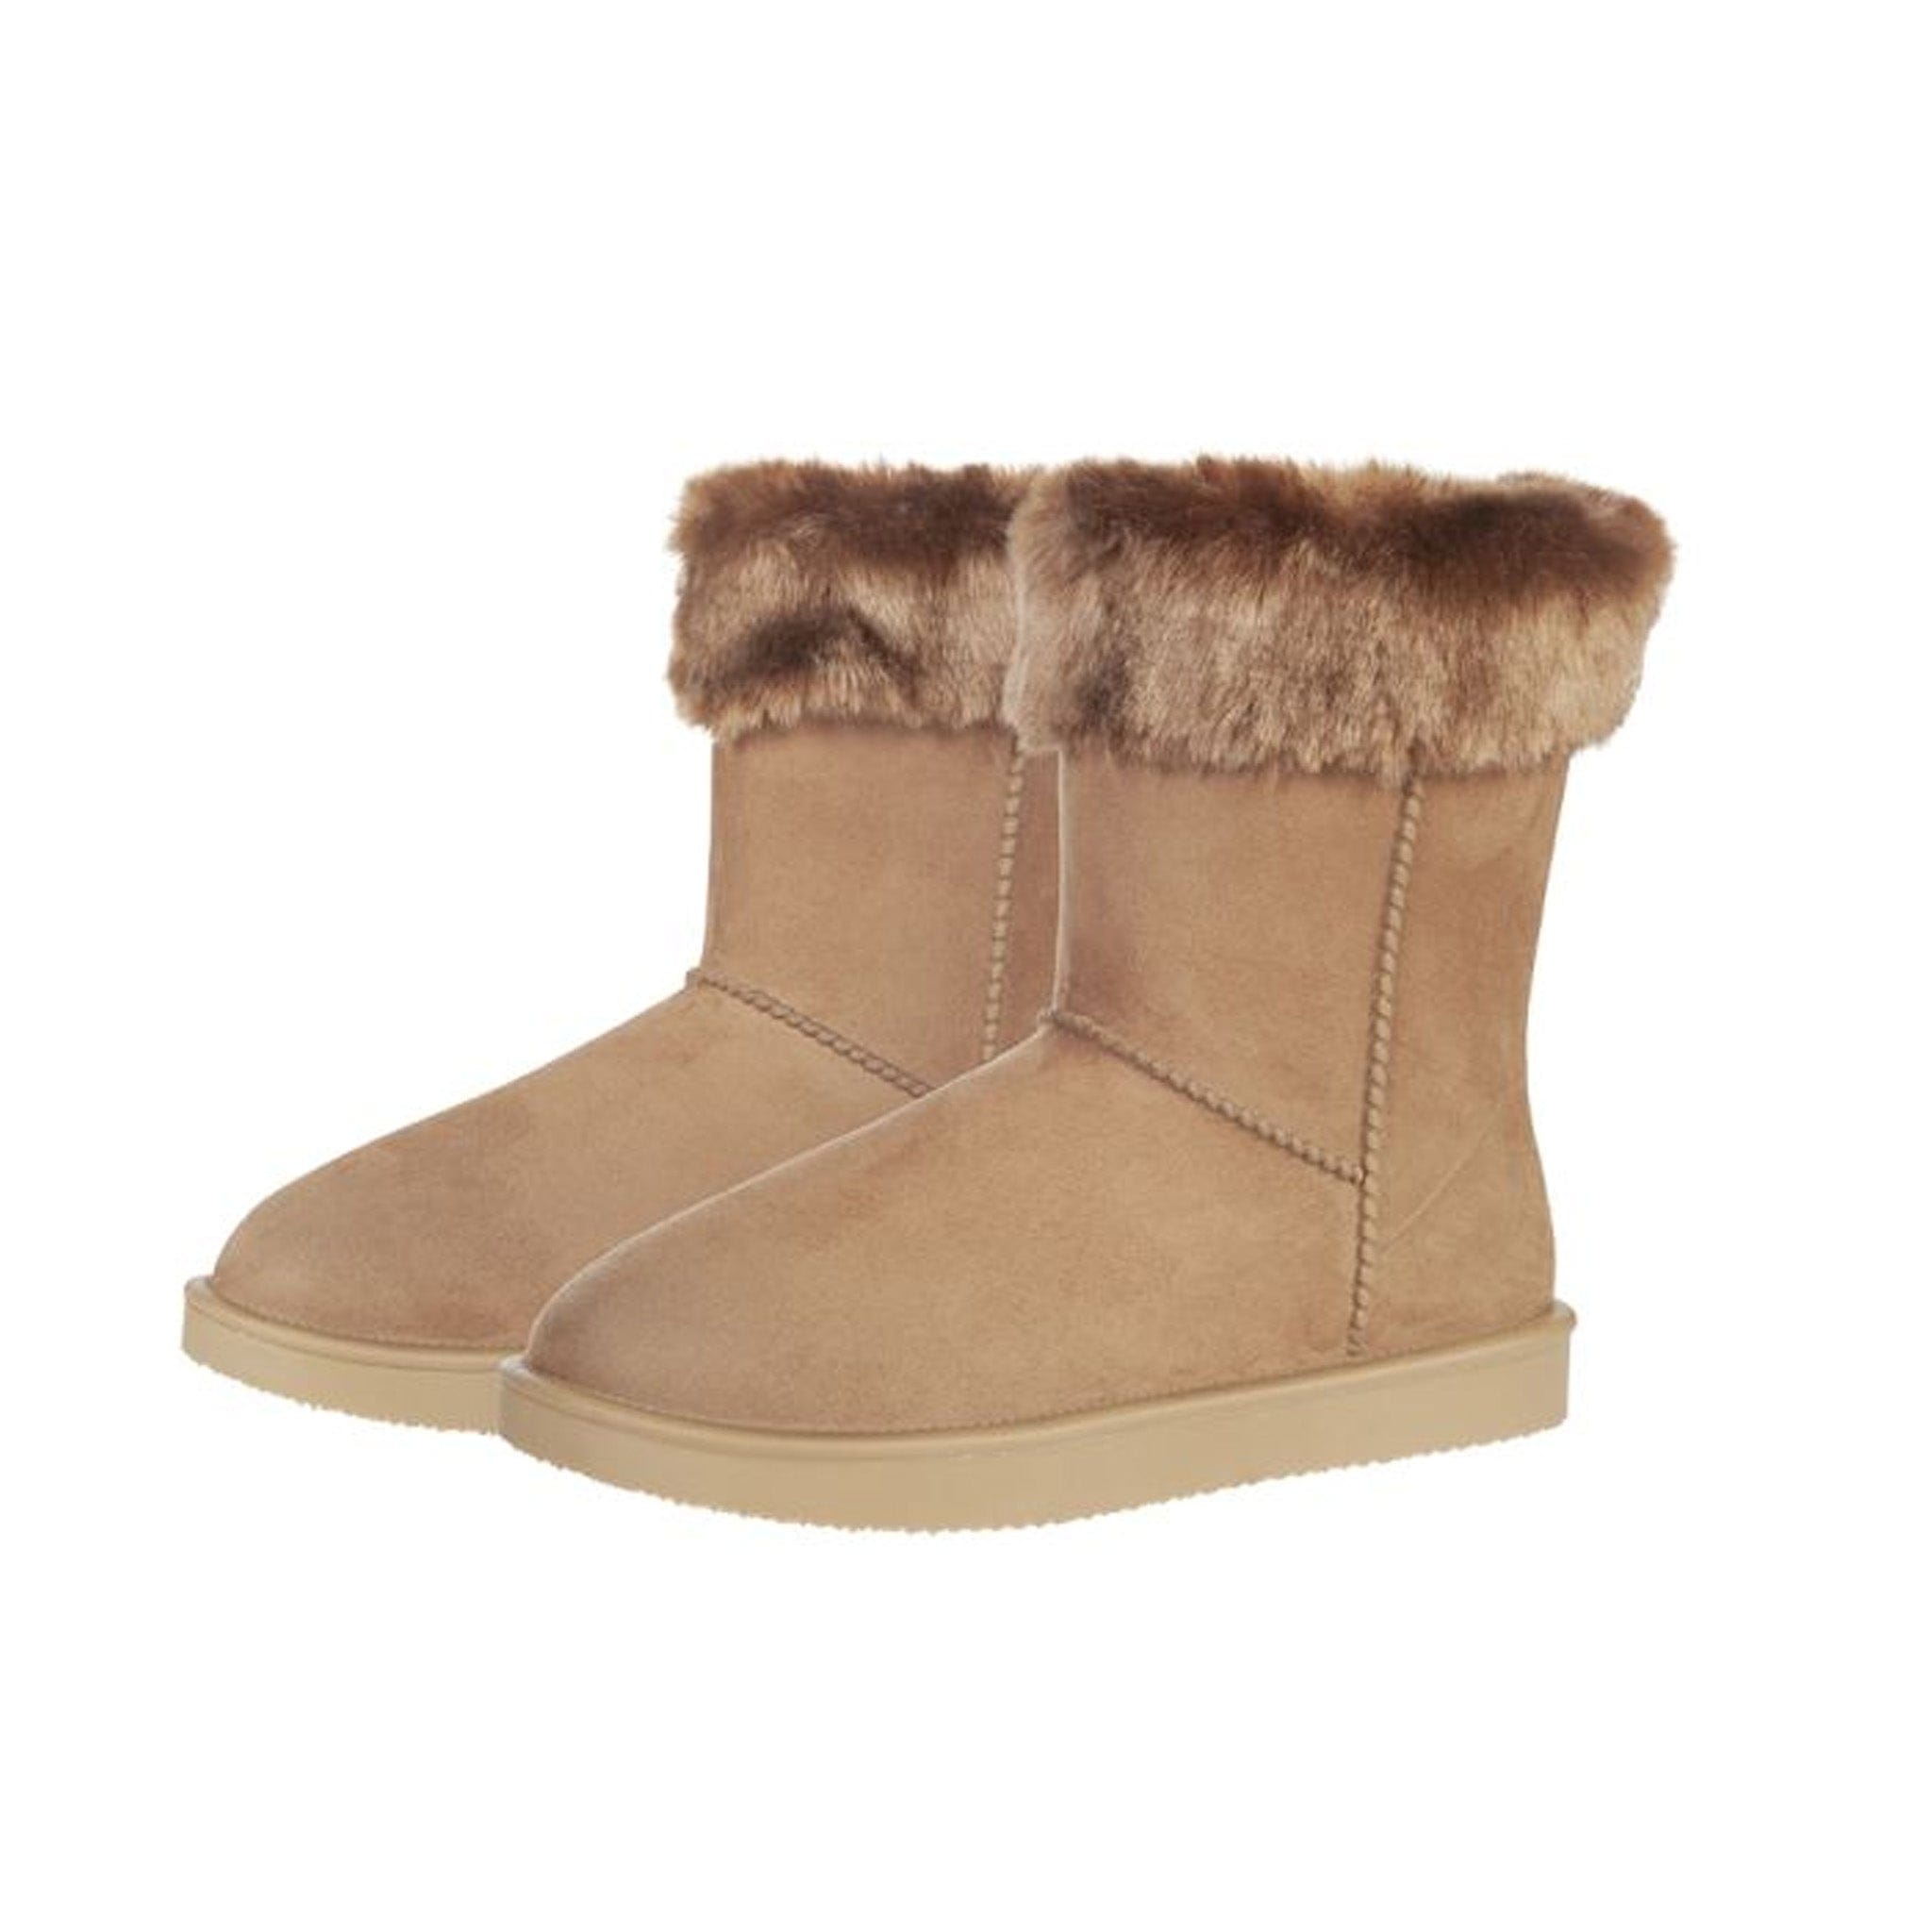 HKM Davos All Weather Fur Topped Boots Camel 11739